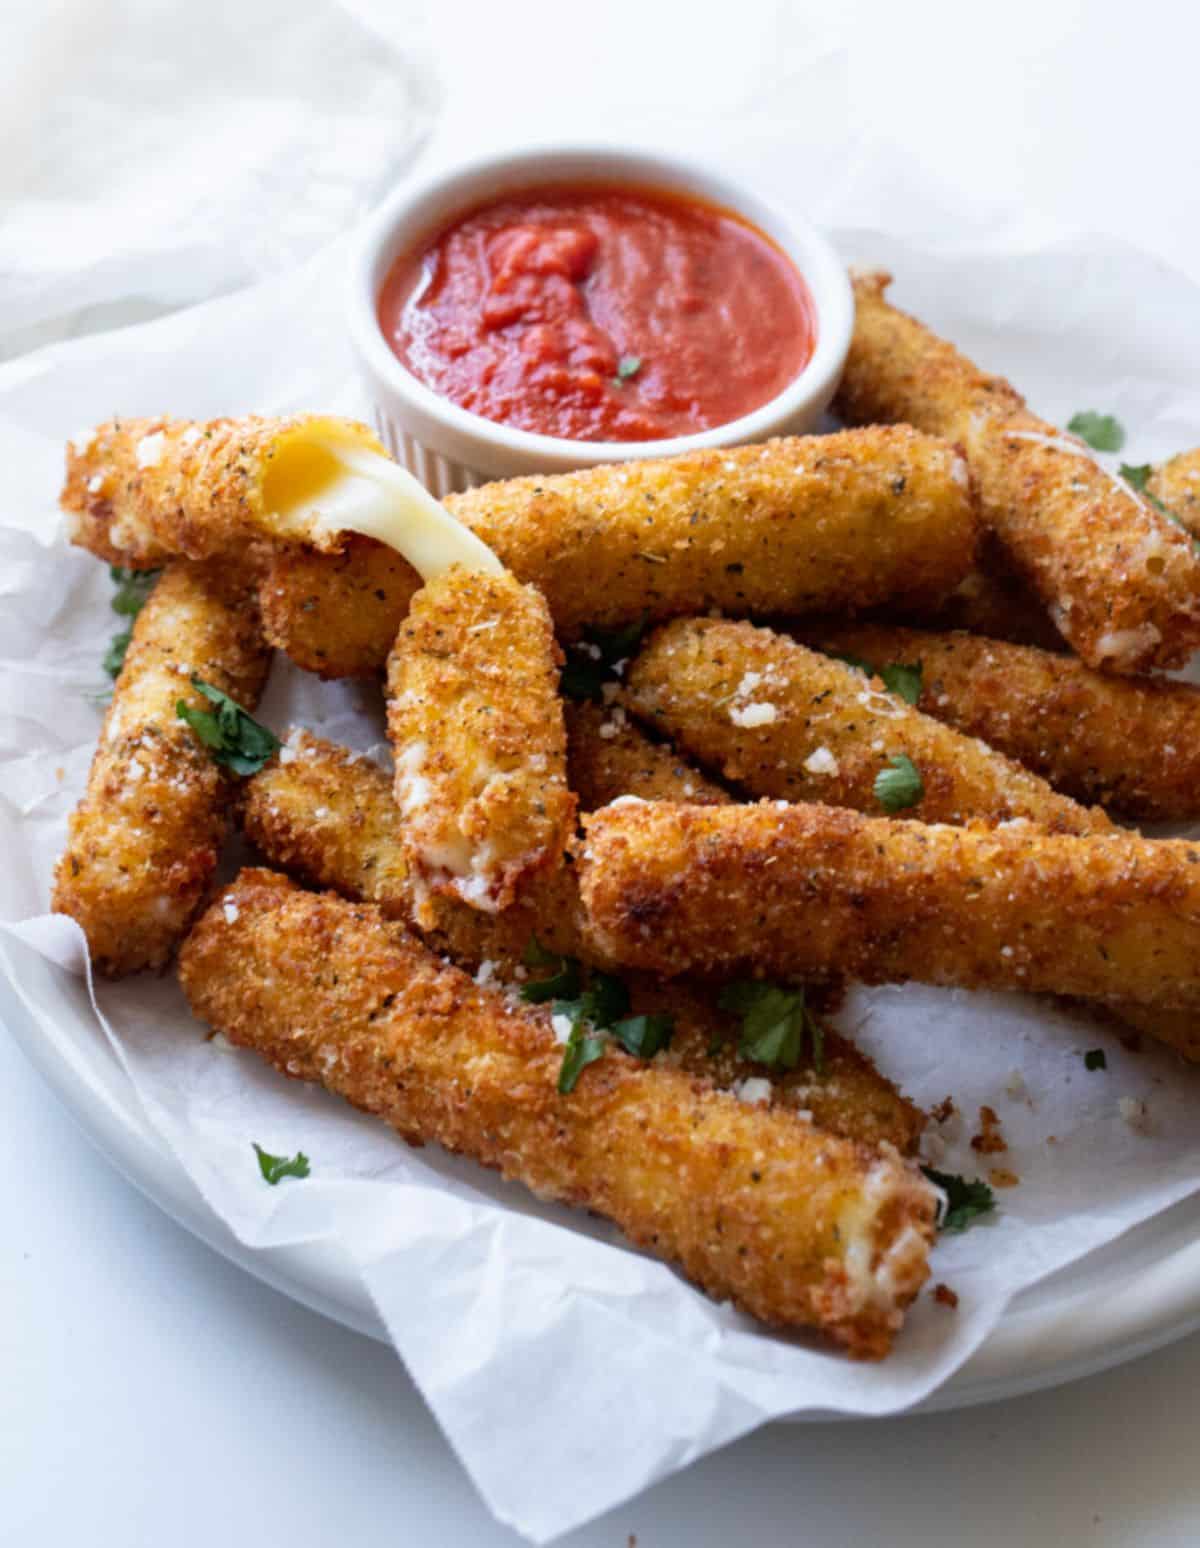 Gluten-Free Mozzarella Sticks with a dip in bowl on a plate.